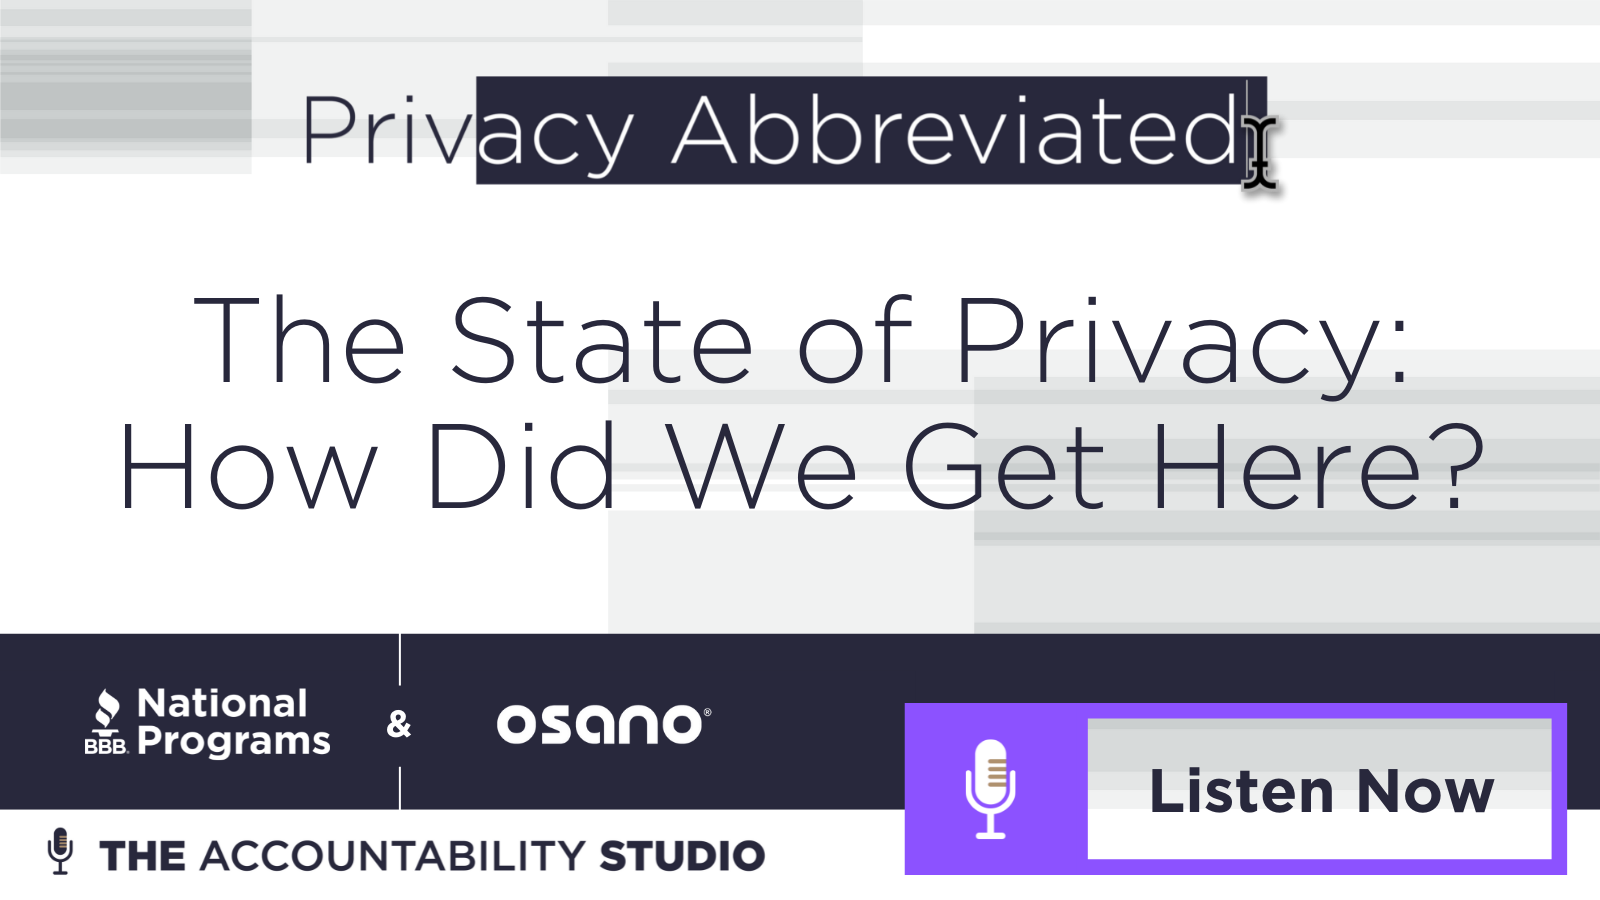 Listen to the Privacy Abbreviated podcast